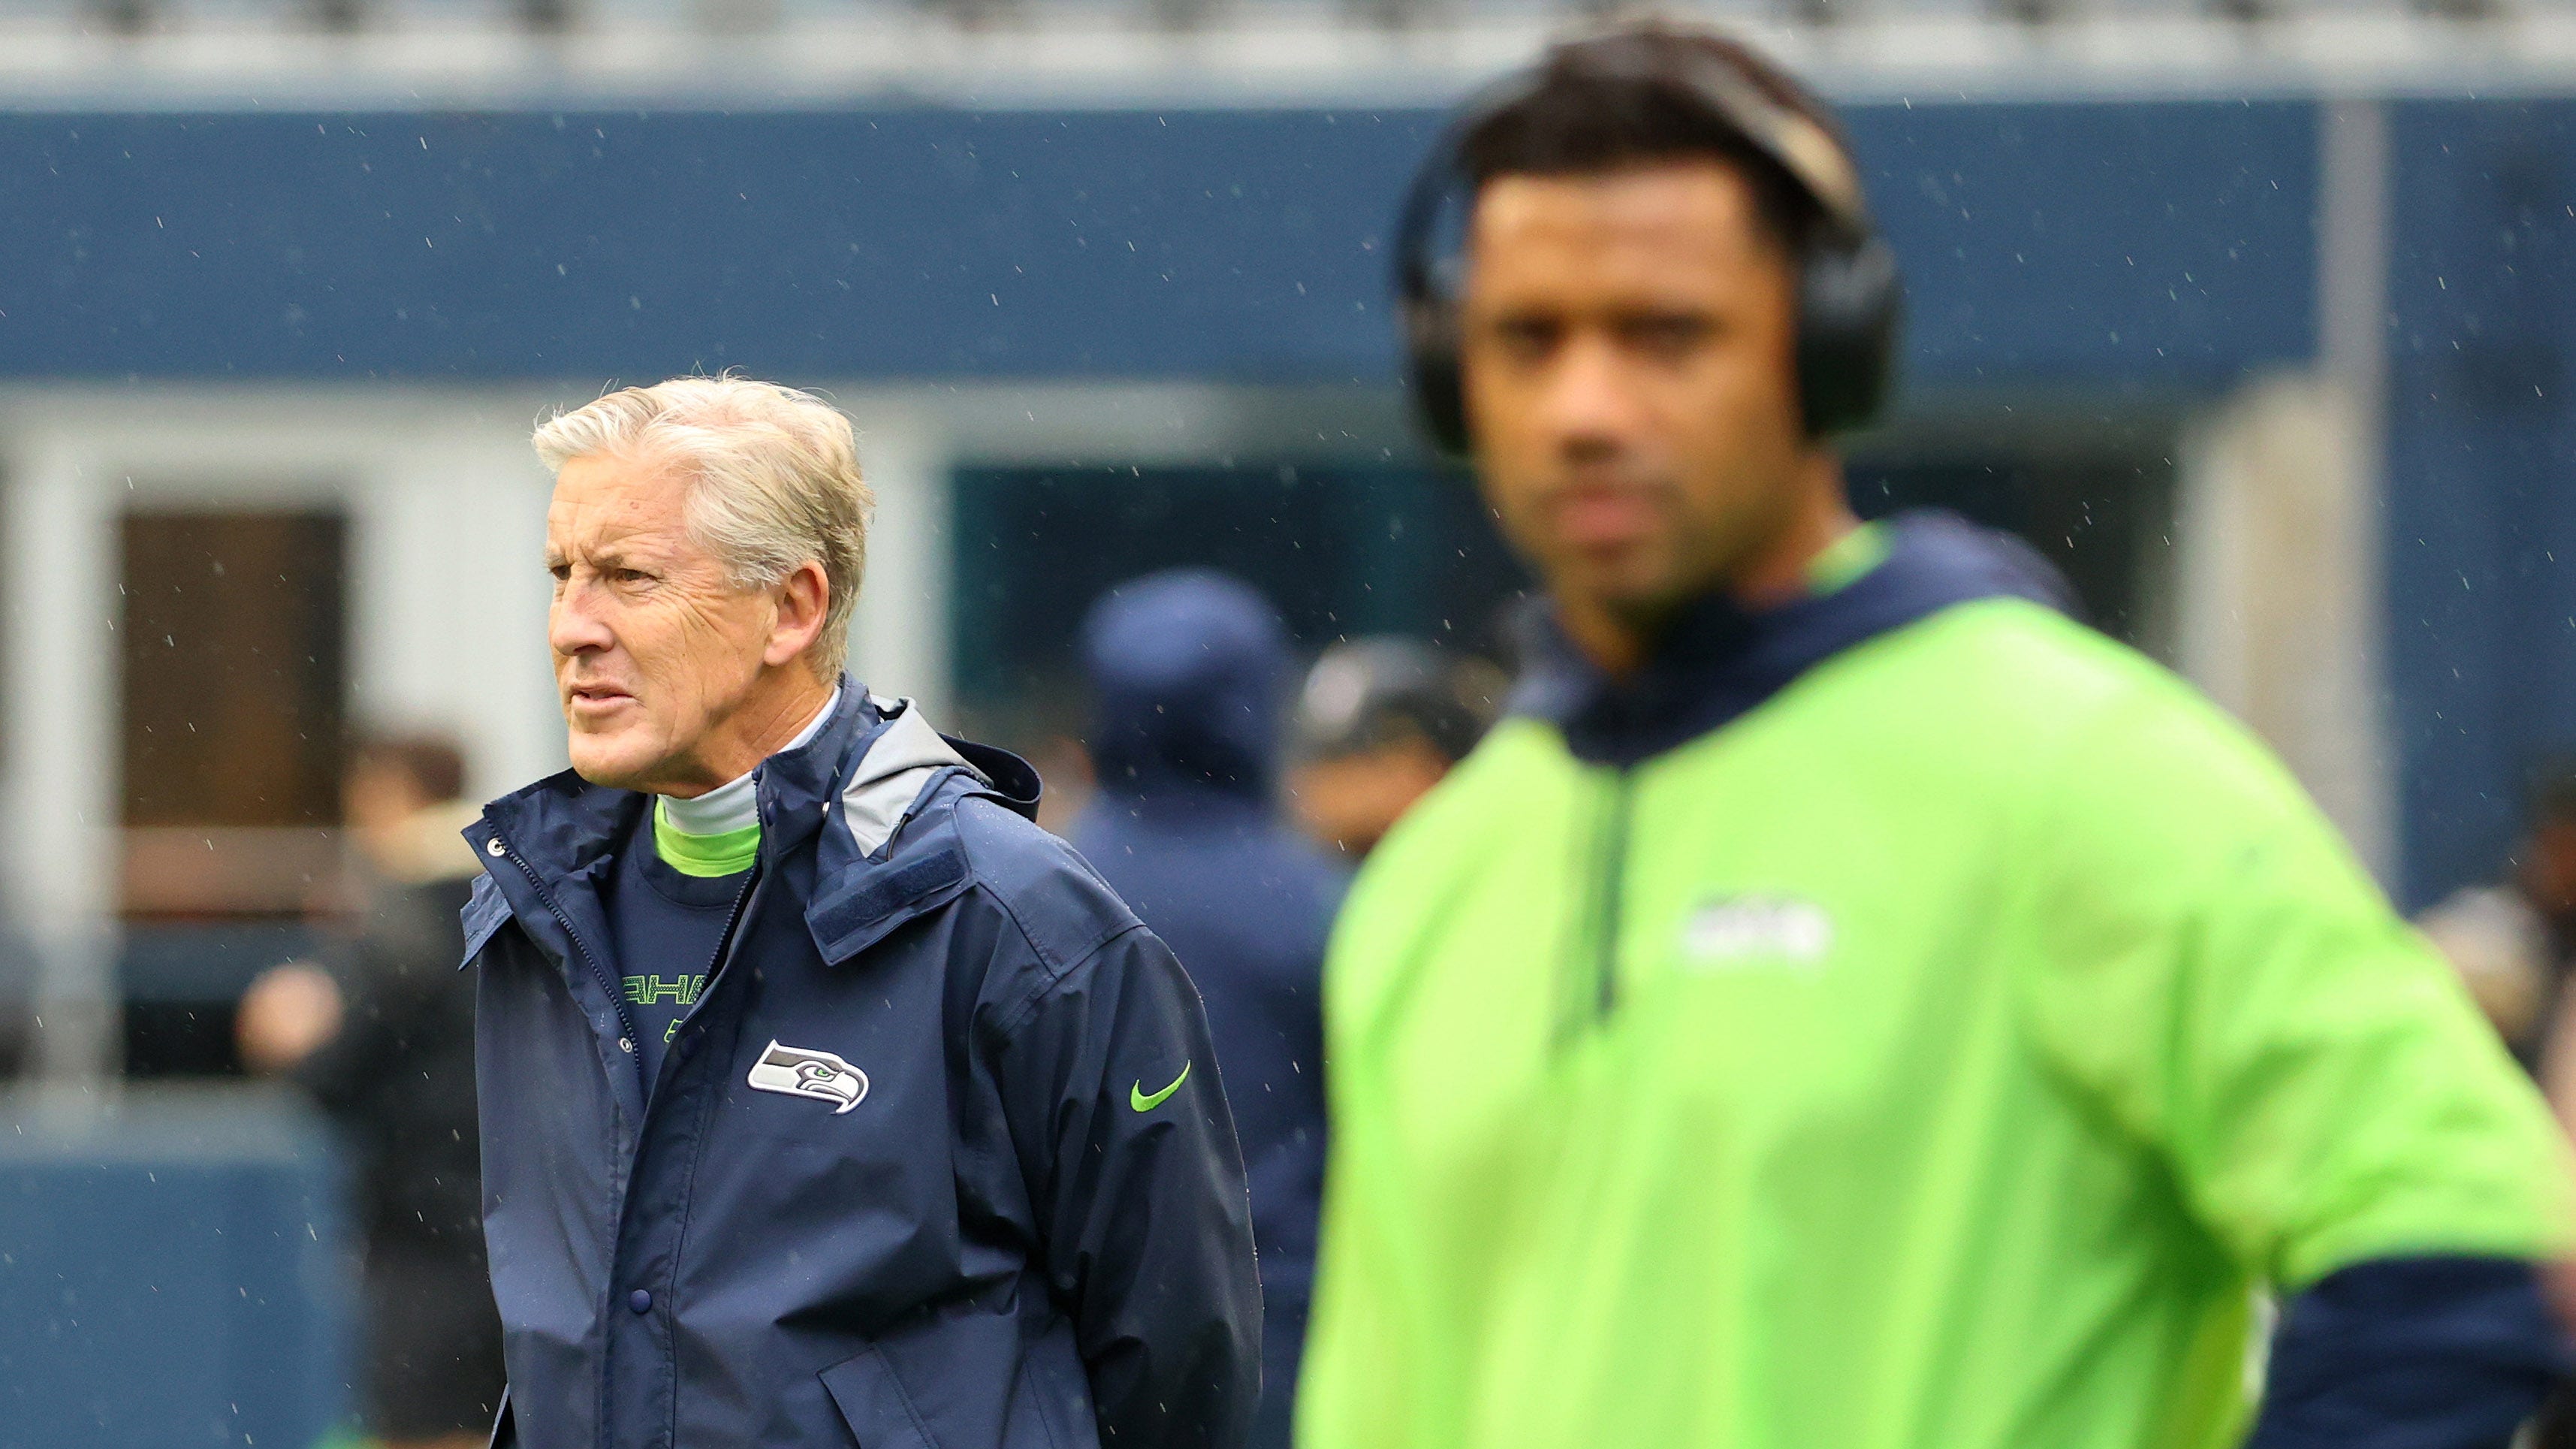 Seahawks’ Pete Carroll says without Russell Wilson he ‘probably wouldn’t have been here a long time’ – Fox News